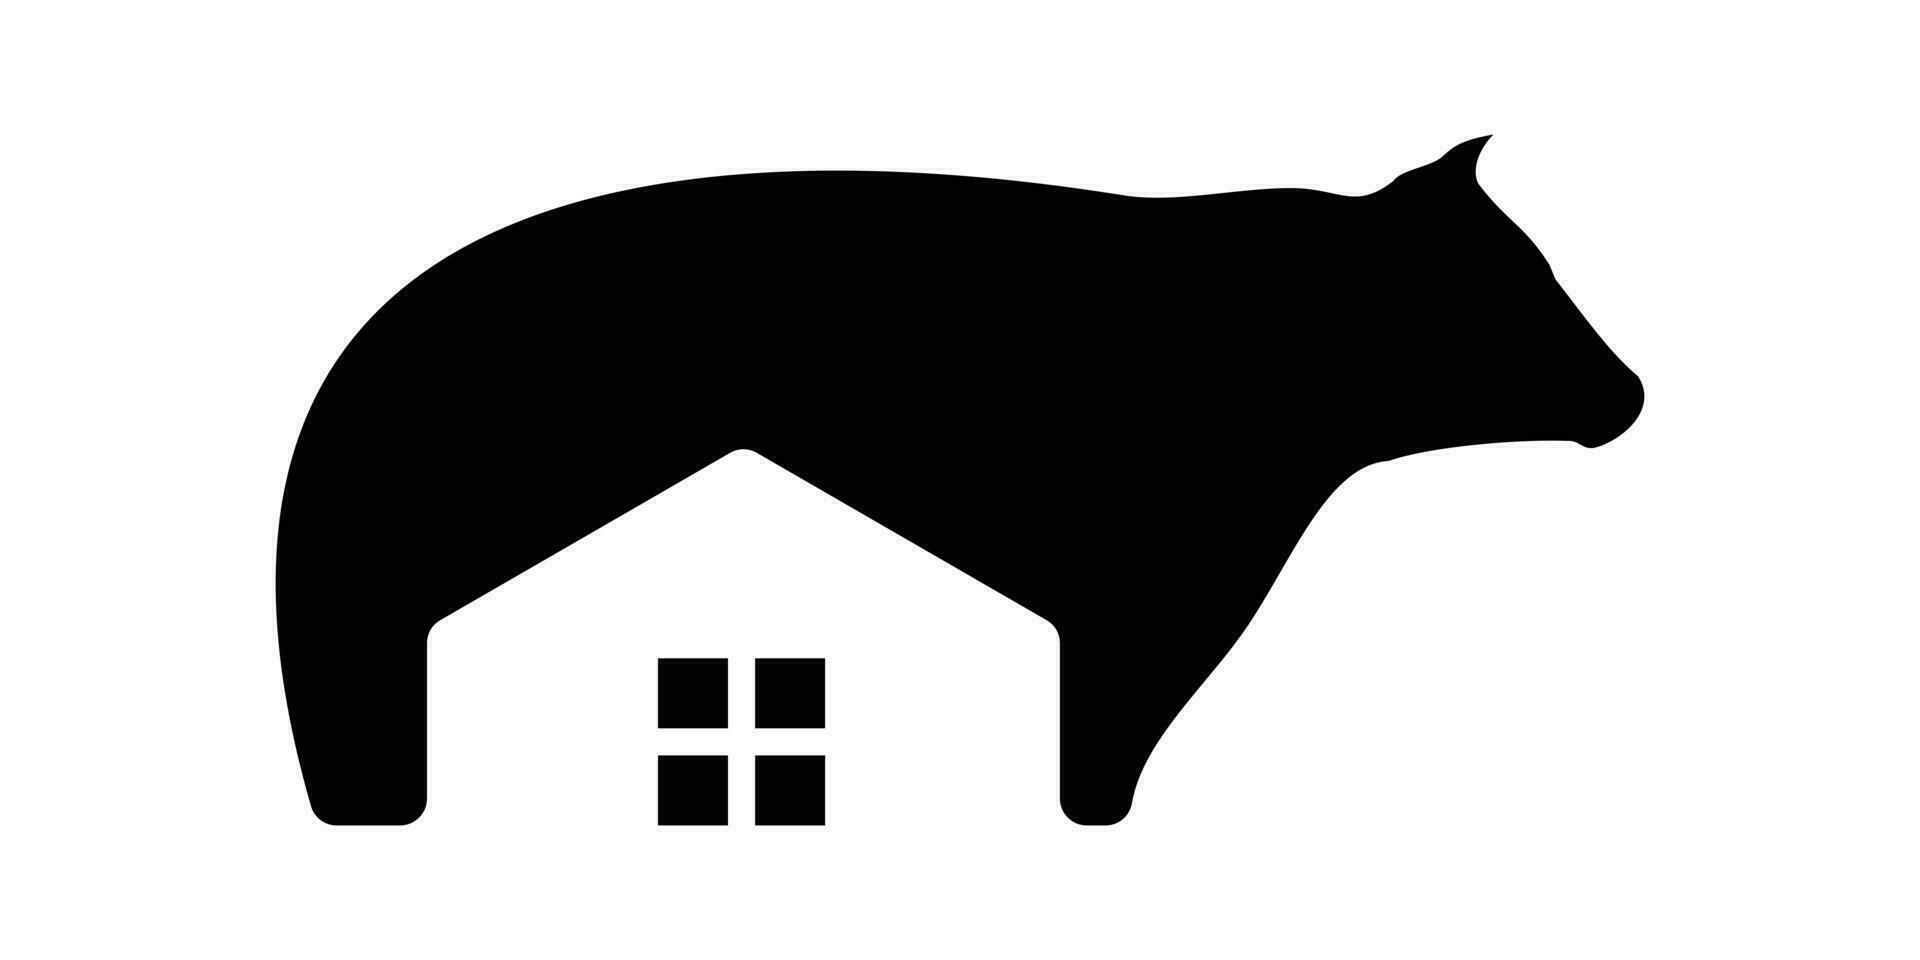 logo design cow and home icon vector illustration